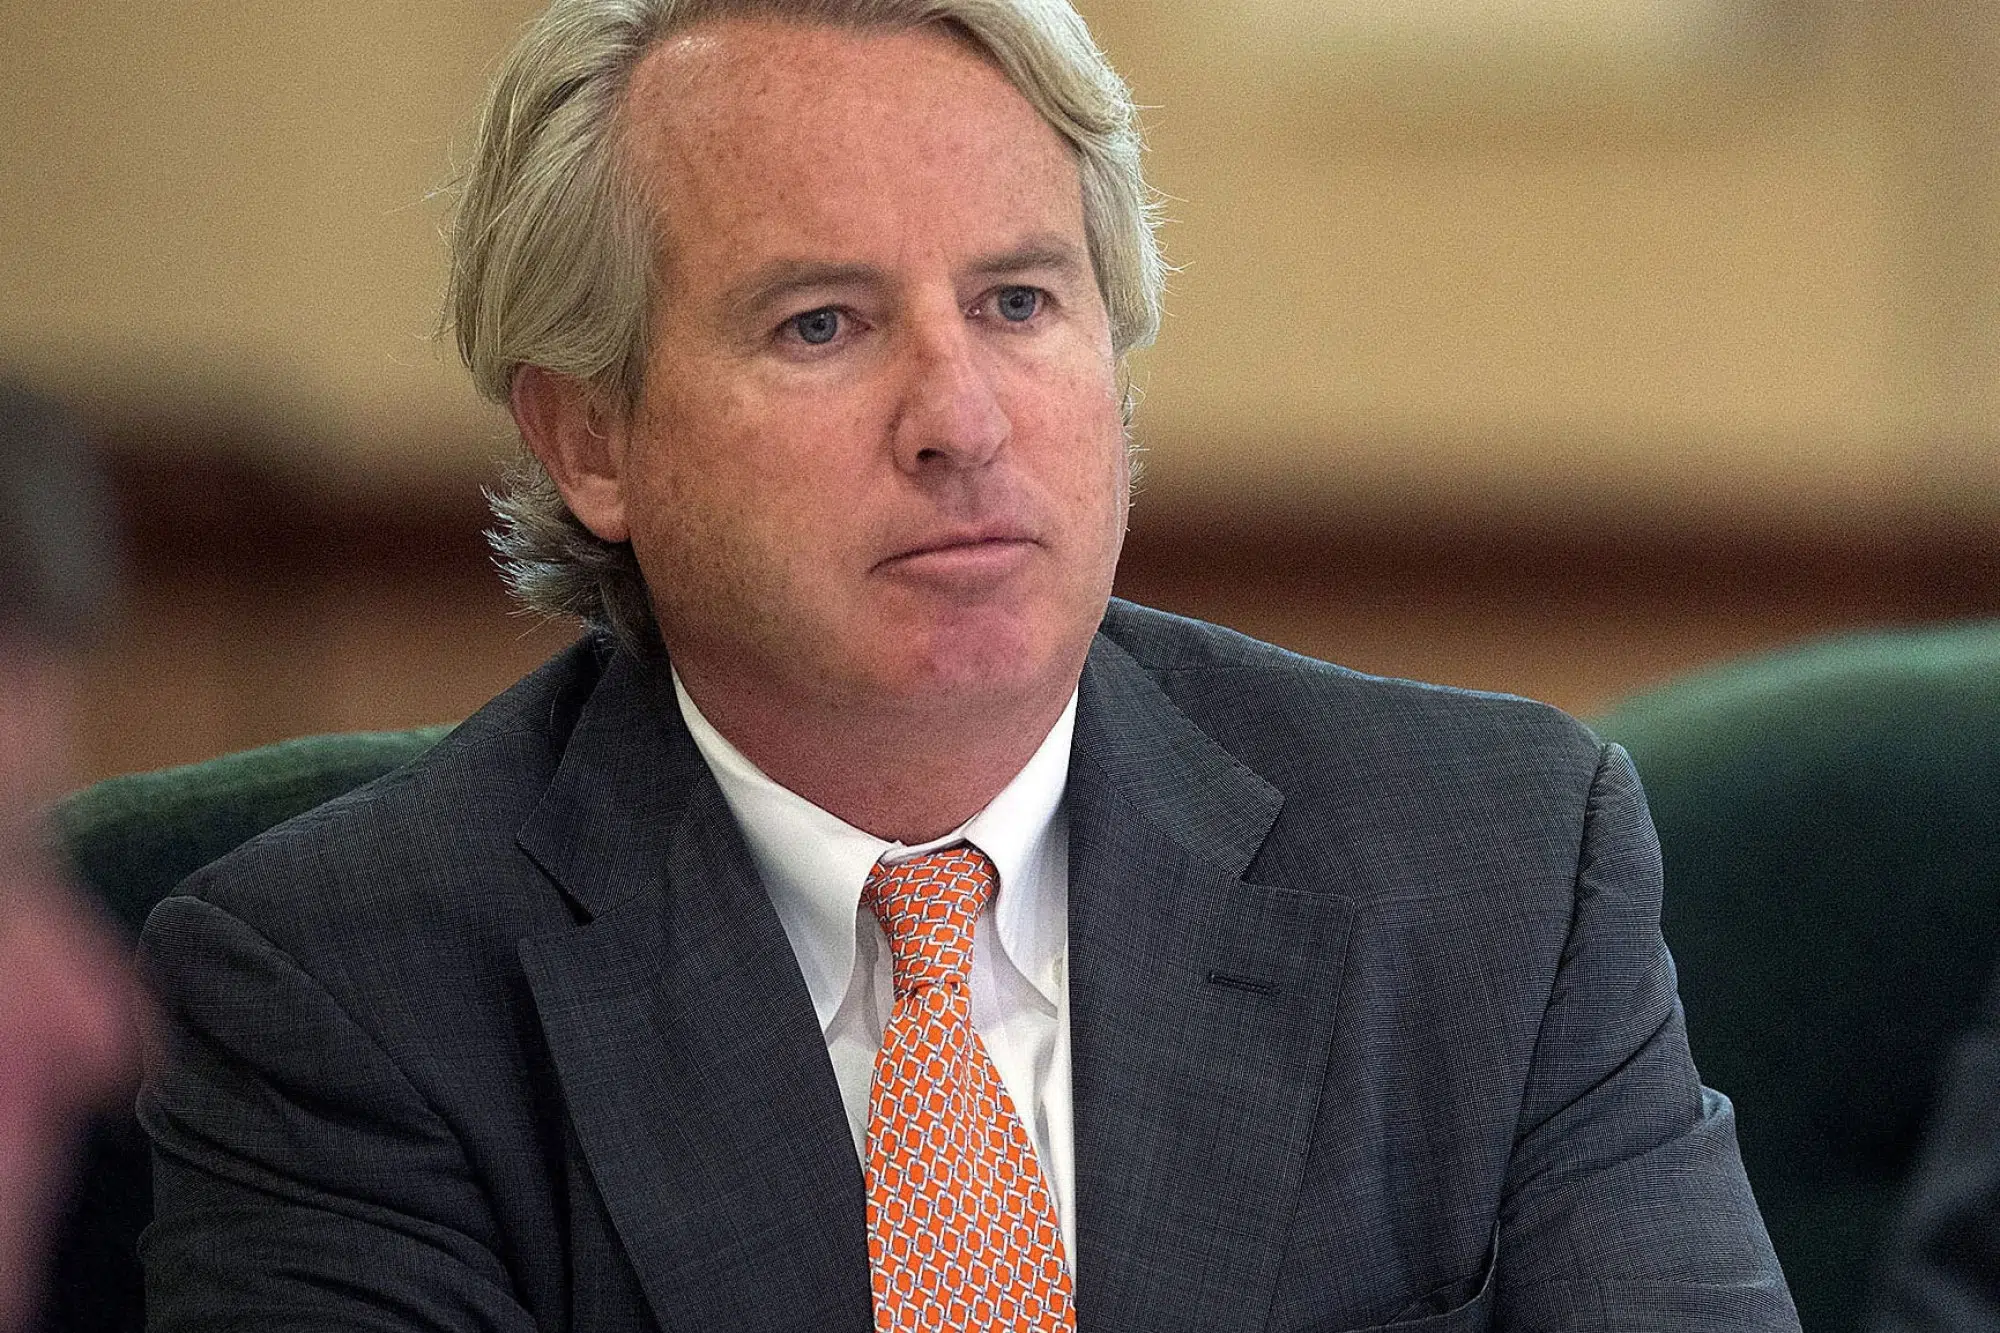 Chris Kennedy Enters Illinois Governor's Race